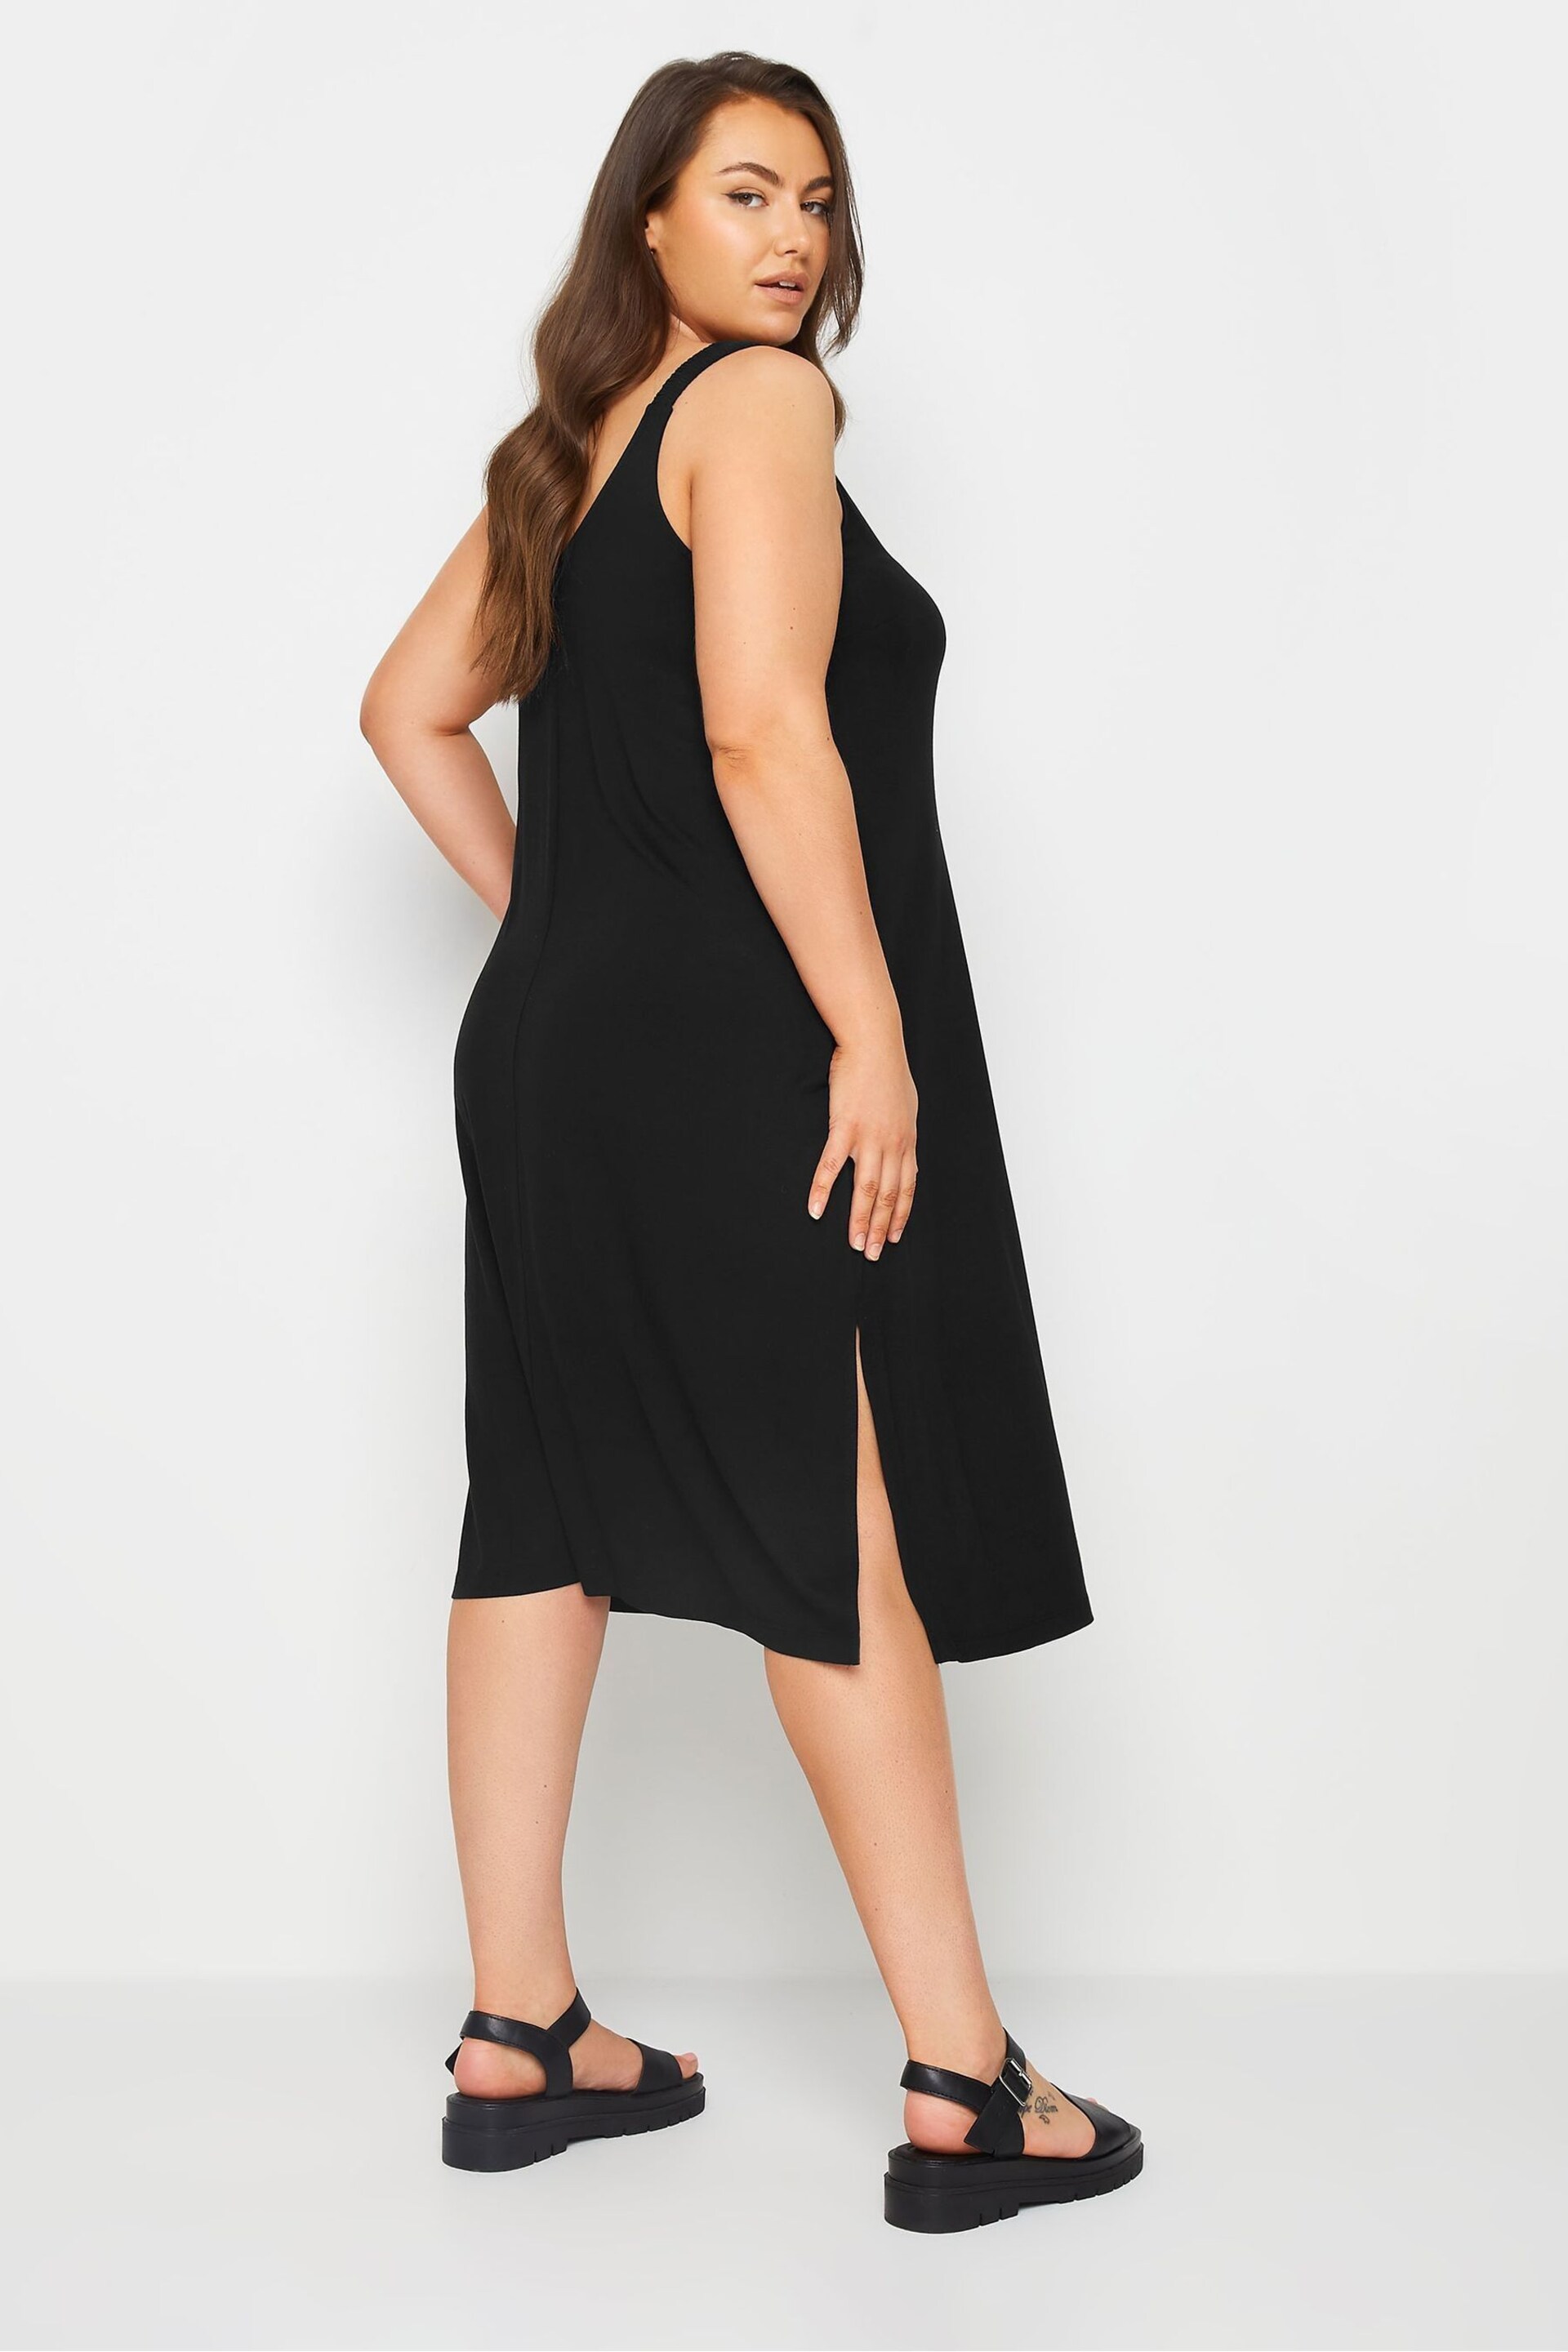 Yours Curve Black Throw On Beach Shirred Strap Dress - Image 4 of 5